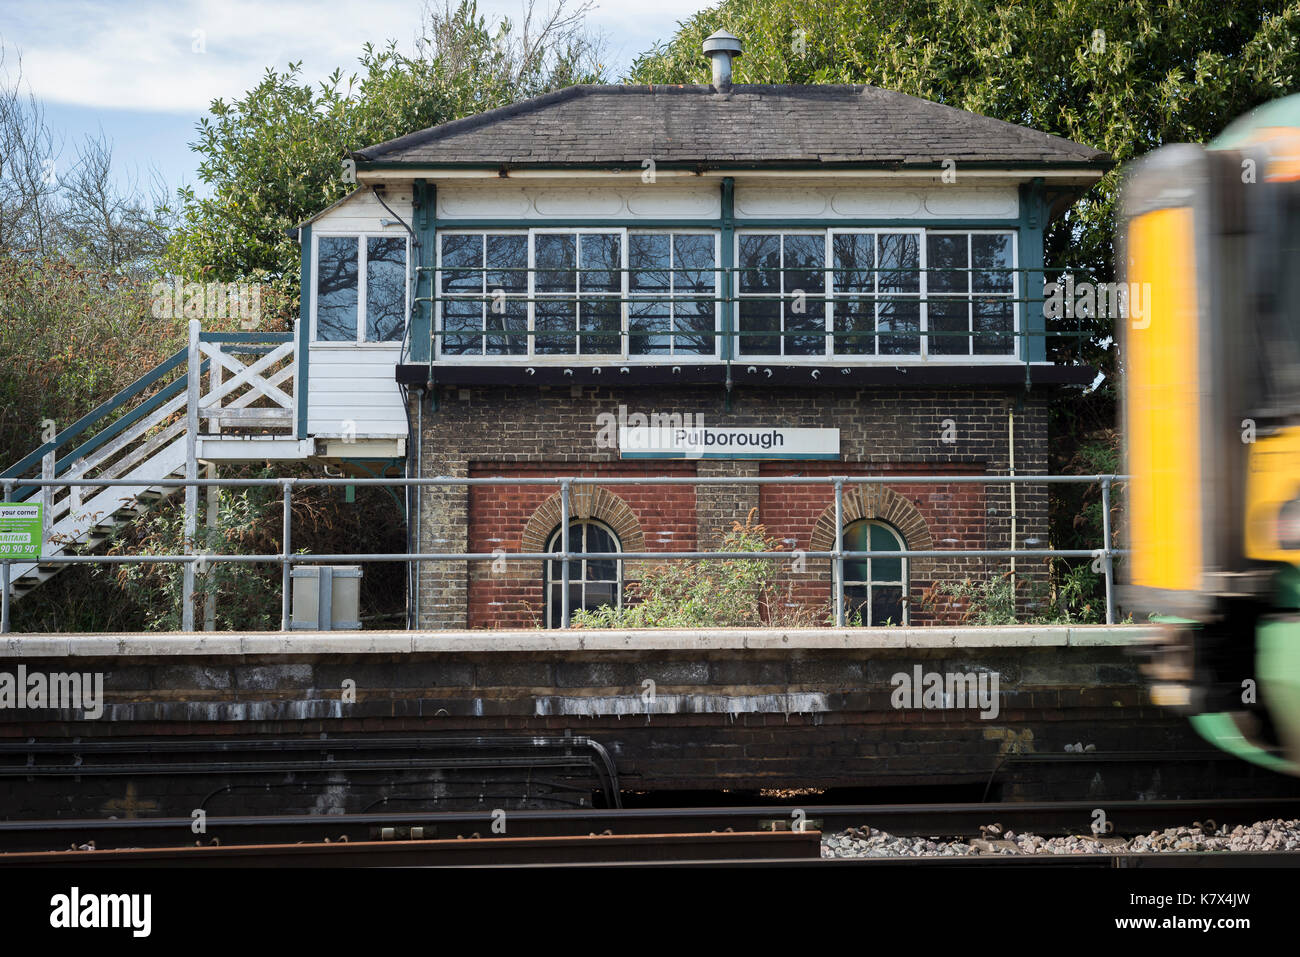 Pulborough Train Station, West Sussex, England Stock Photo